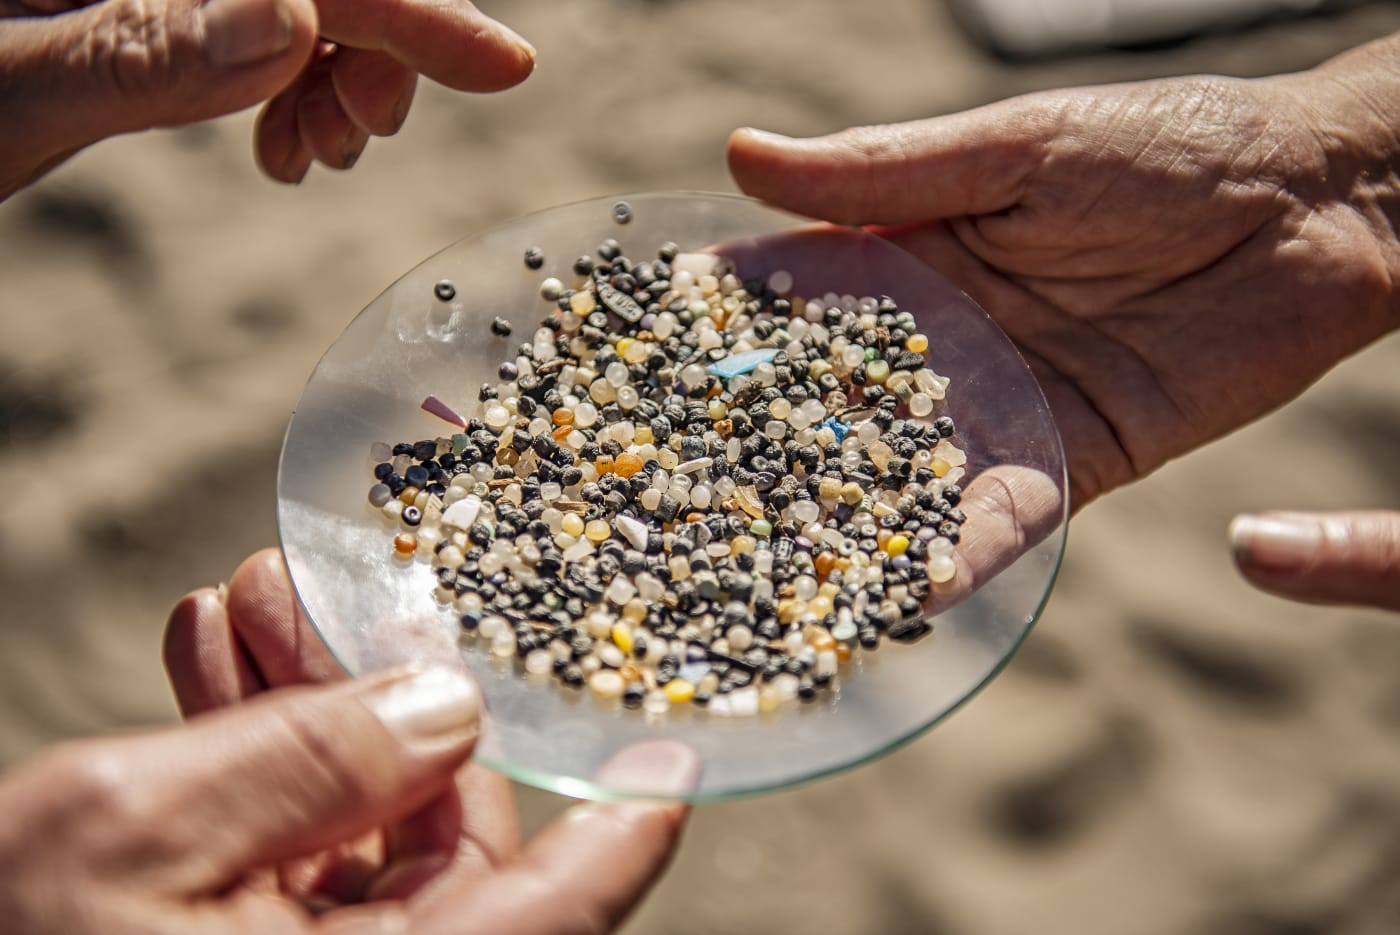 Microplastics collected in the UK